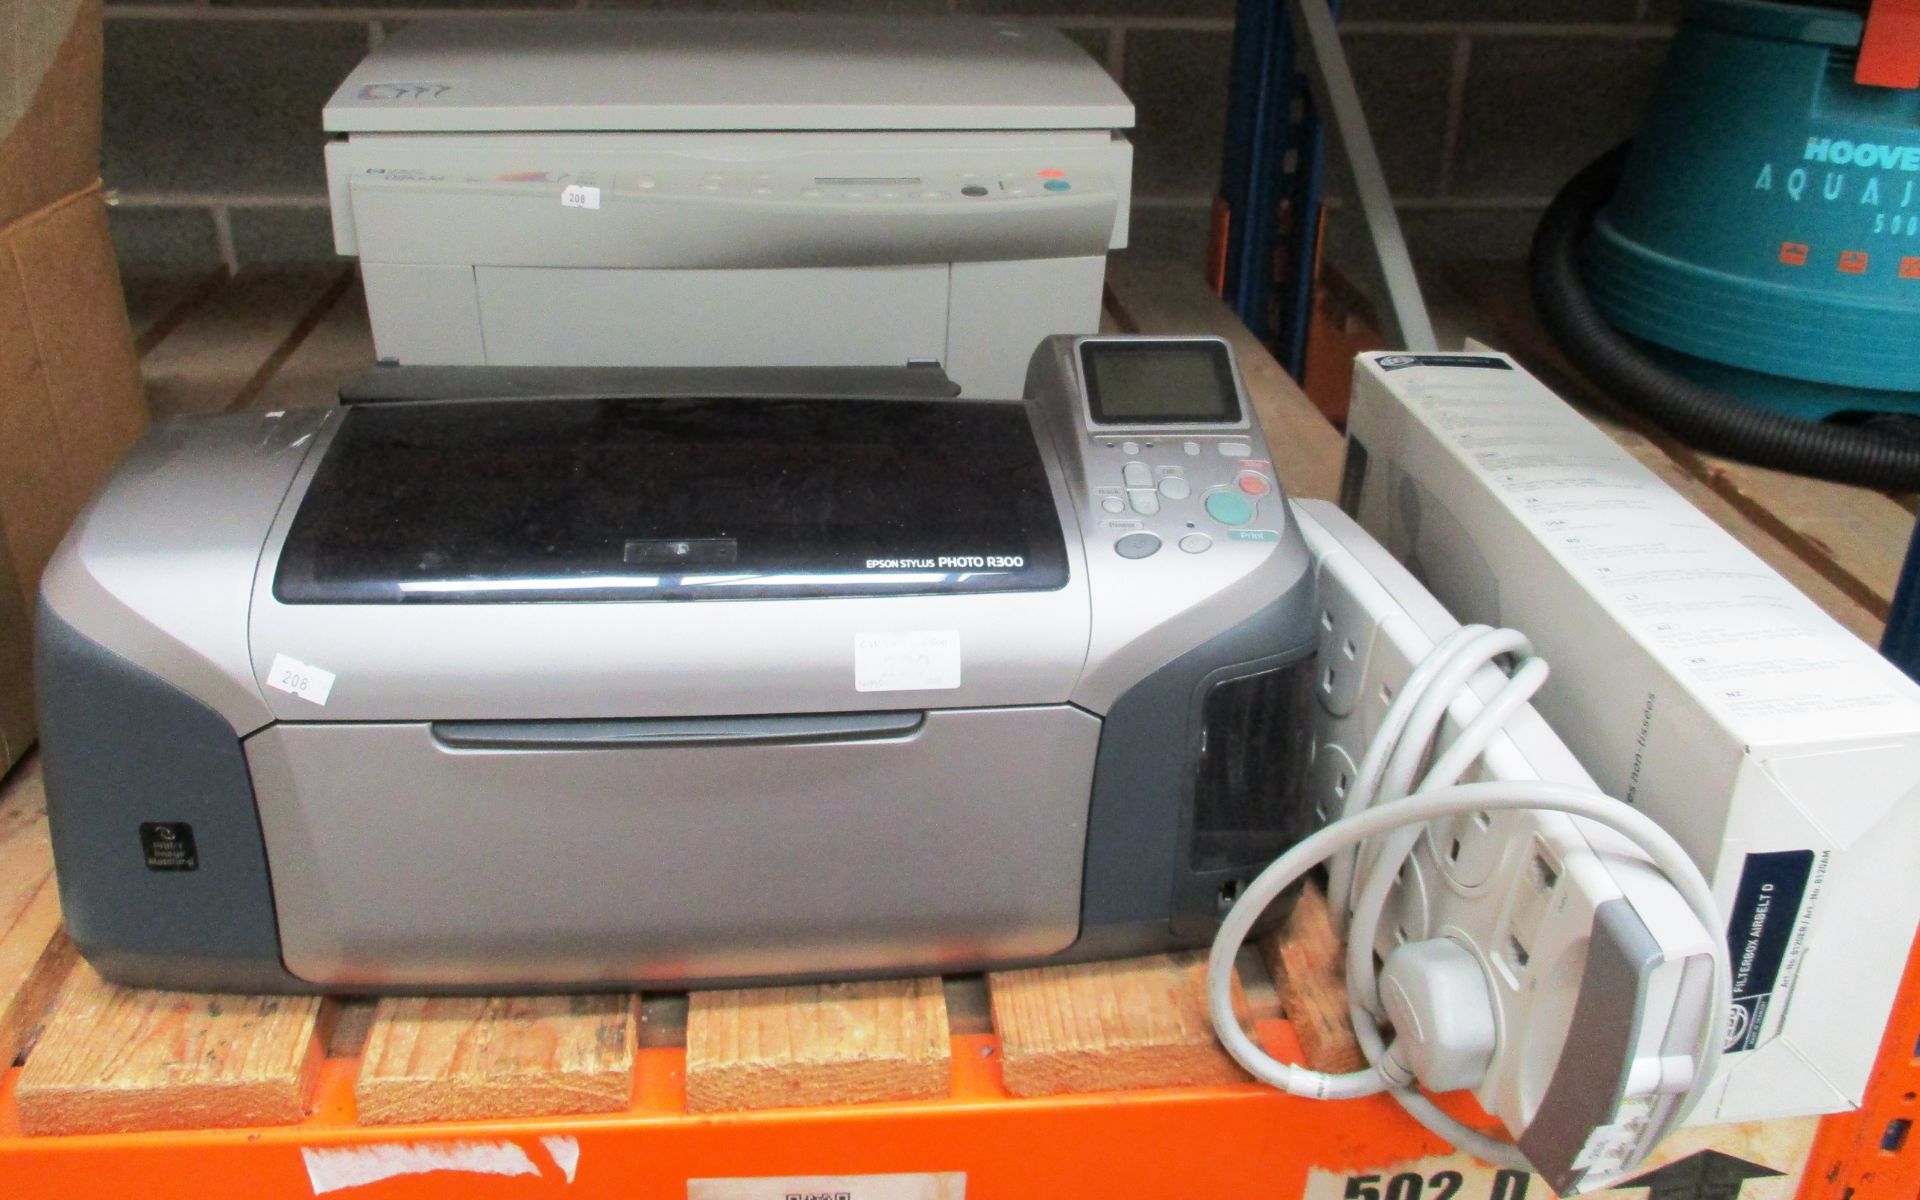 3 x items - 2 x office printers and a 240v extension cable